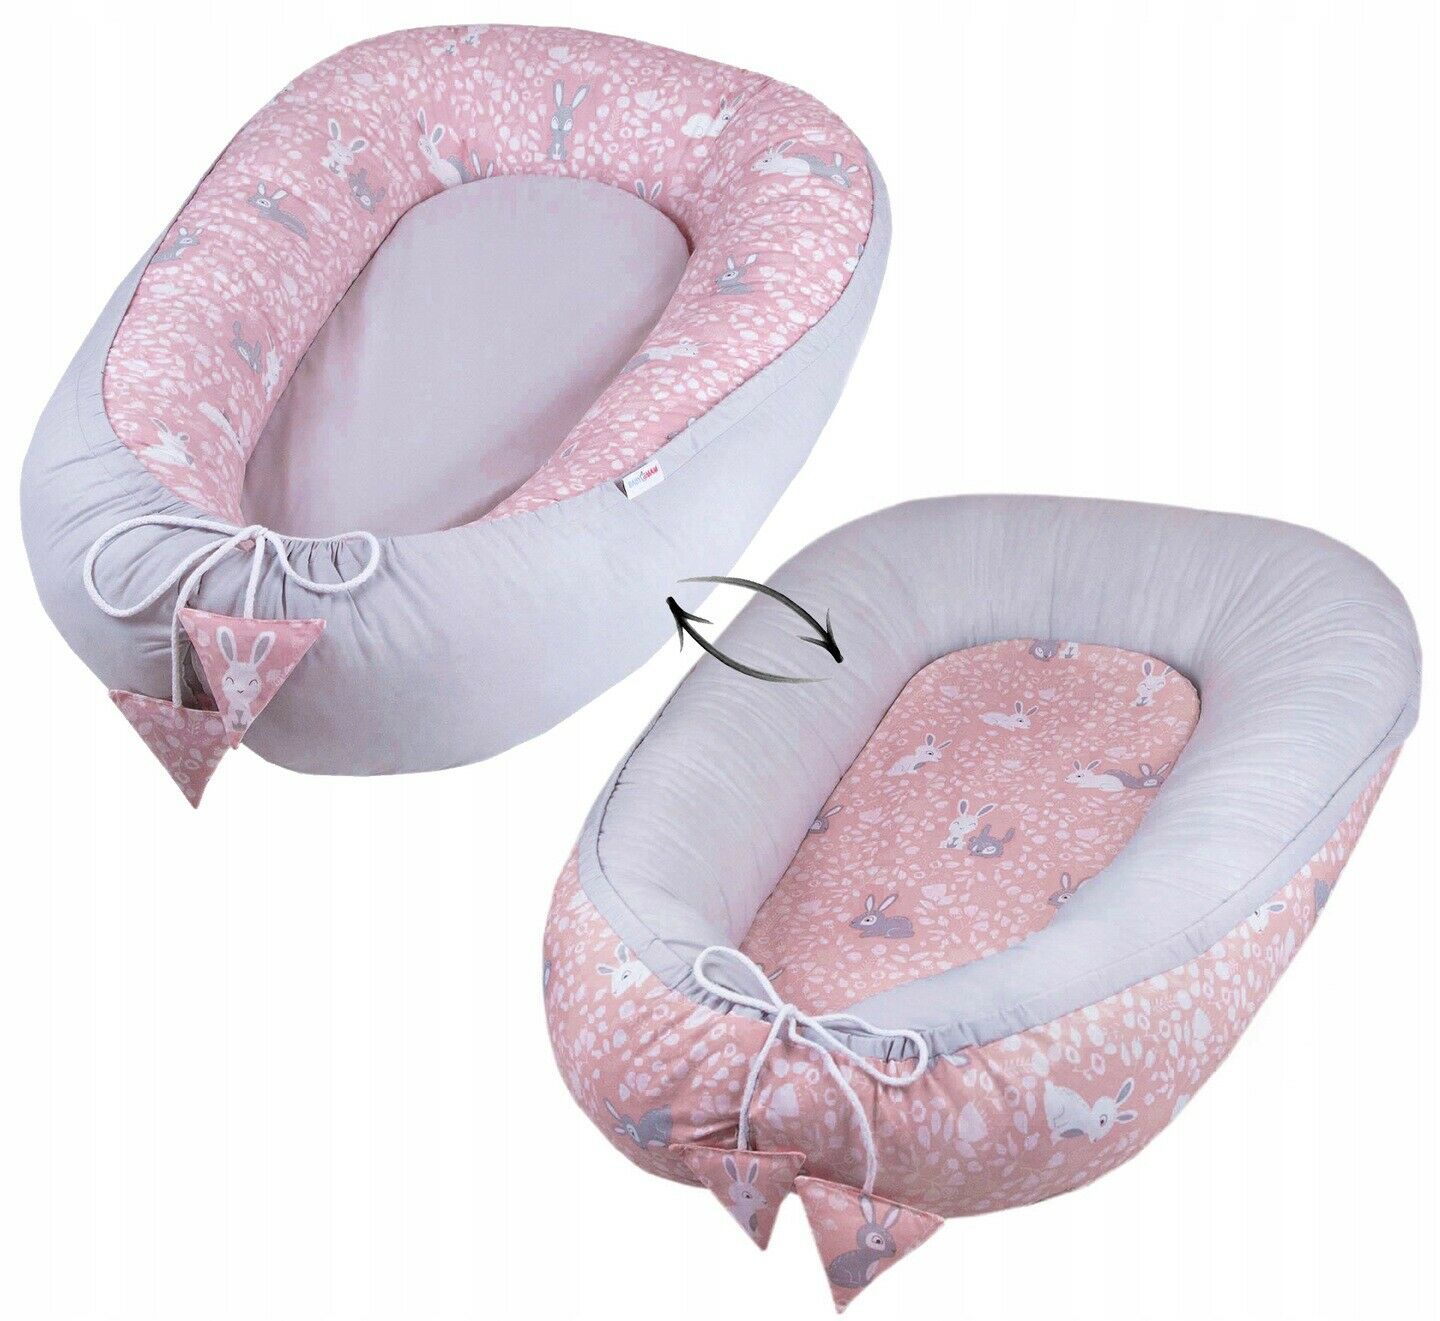 Baby Soft Cocoon Double-sided Infant Sleep Nest Bed Grey/ Bunny Pink